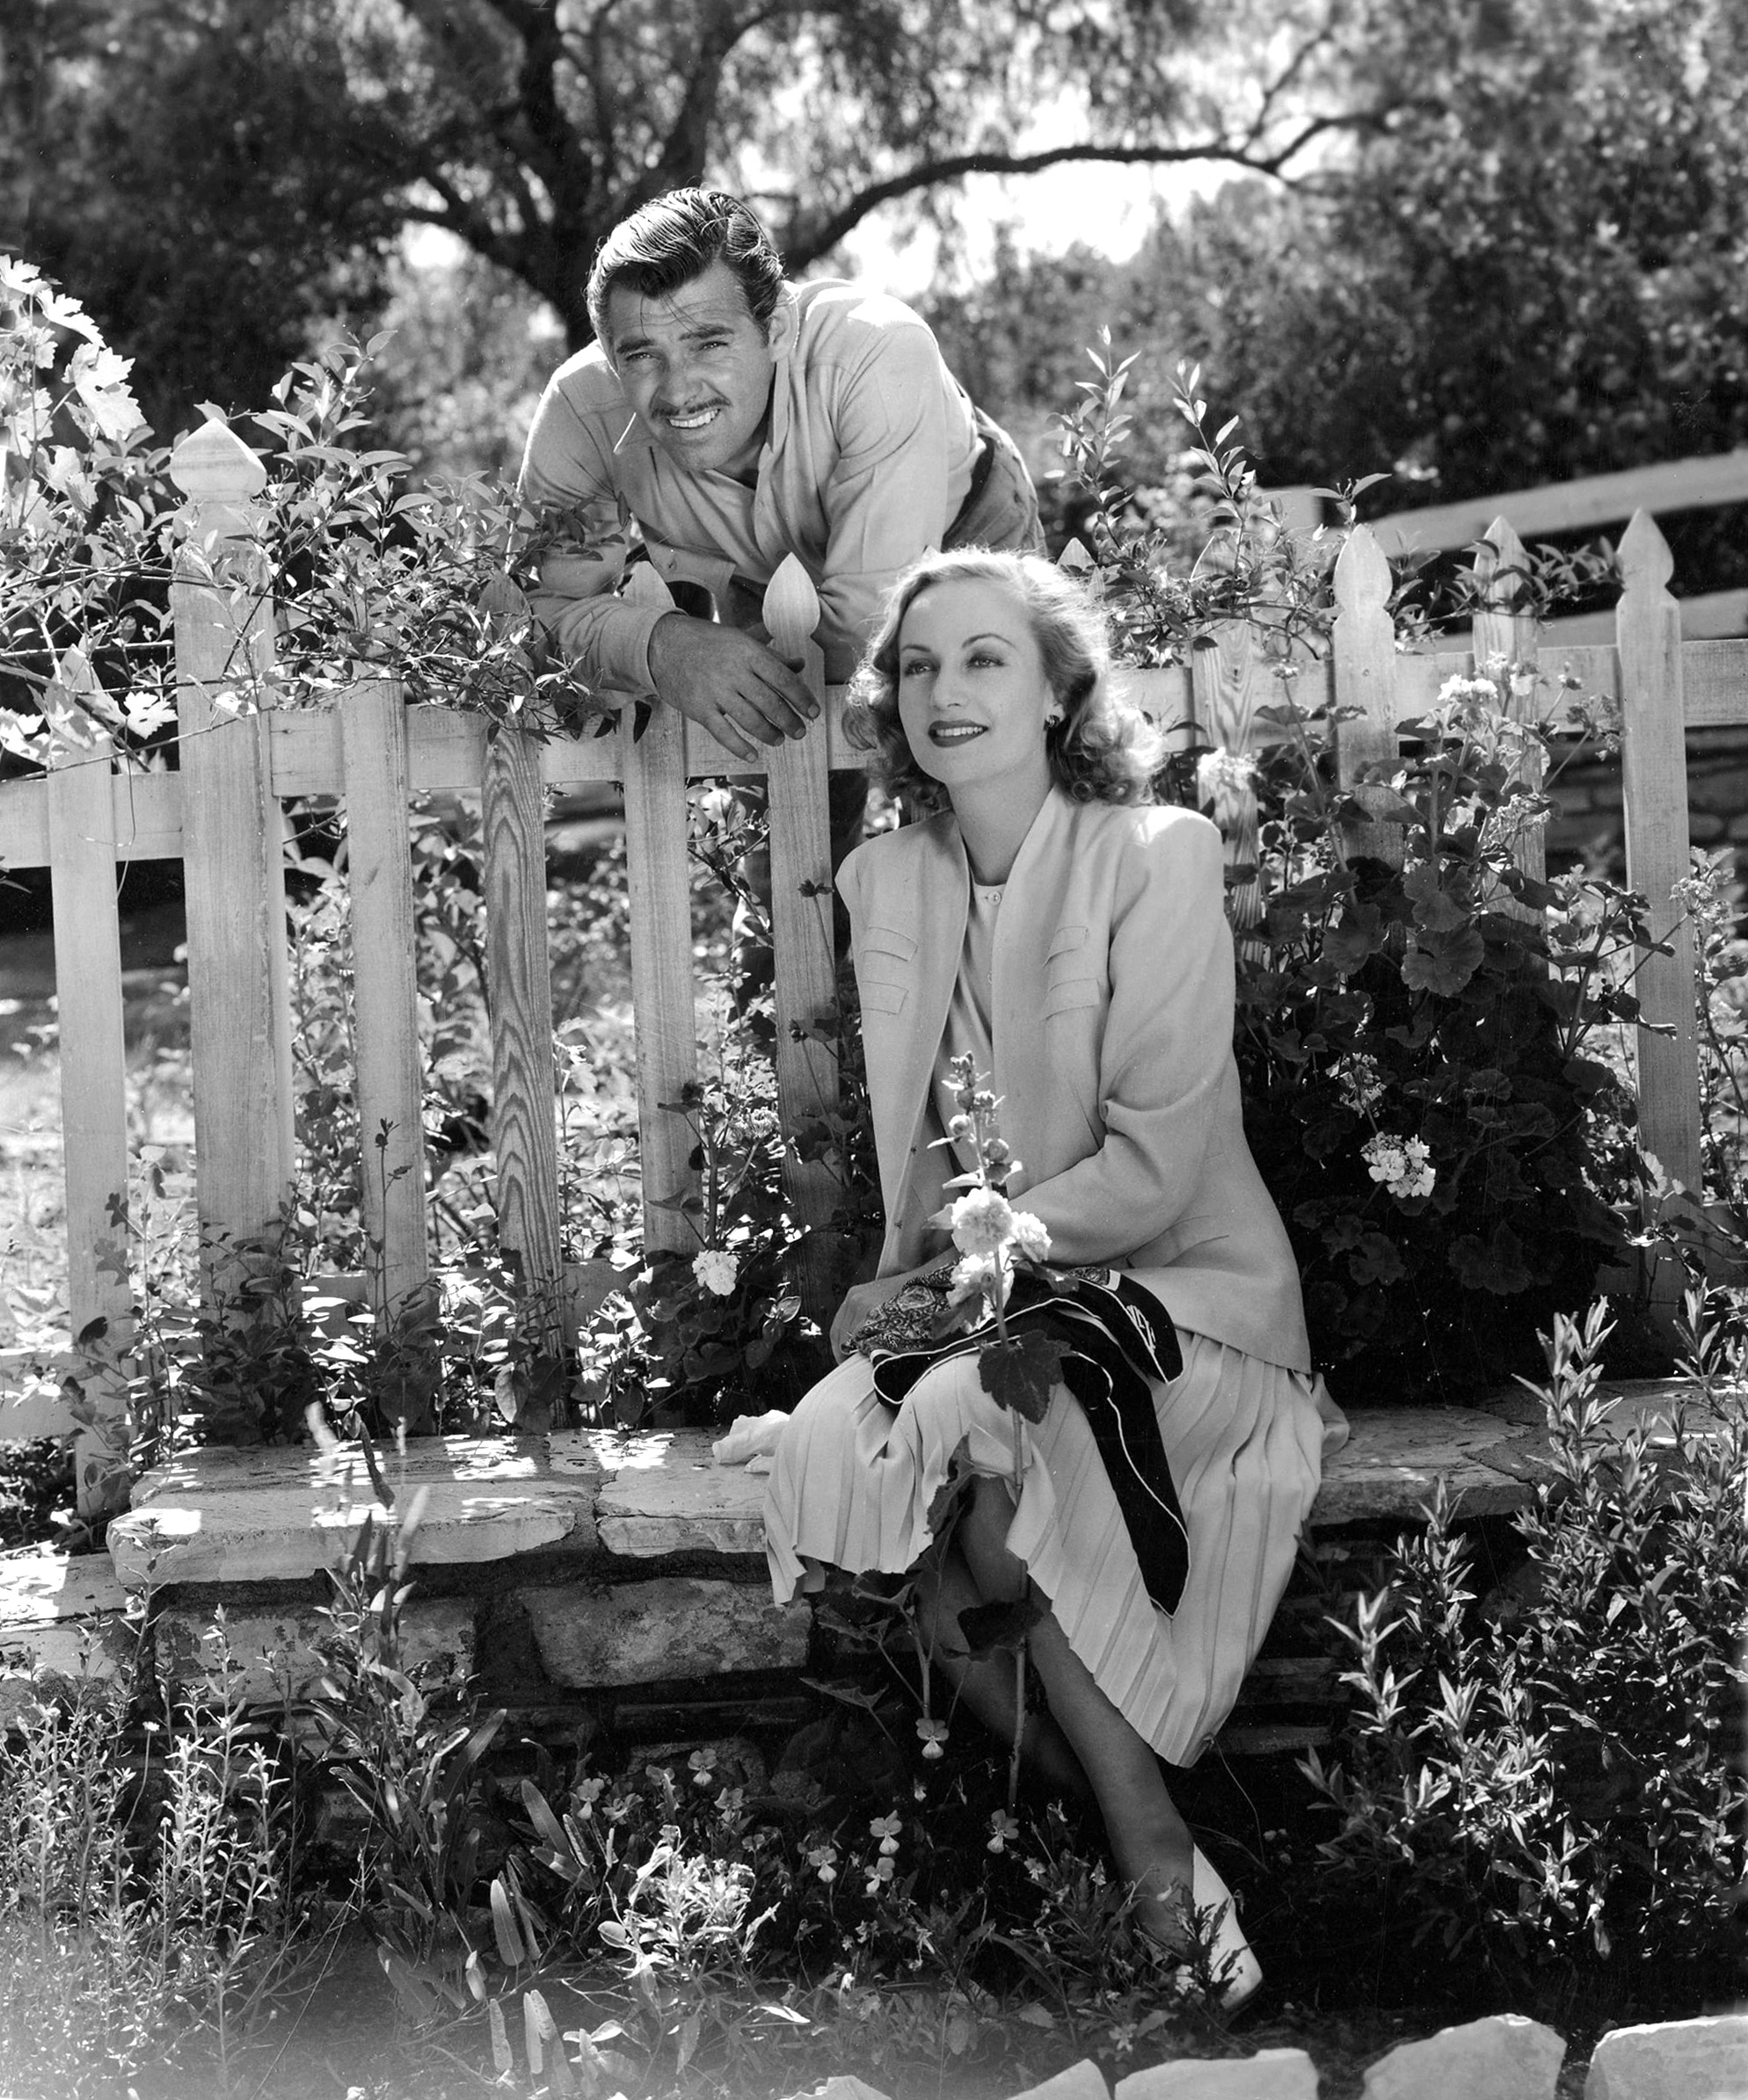 Newlyweds Clark Gable and Carole Lombard Gable pose for a series of official photos at their ranch in Encino California in April 1939.